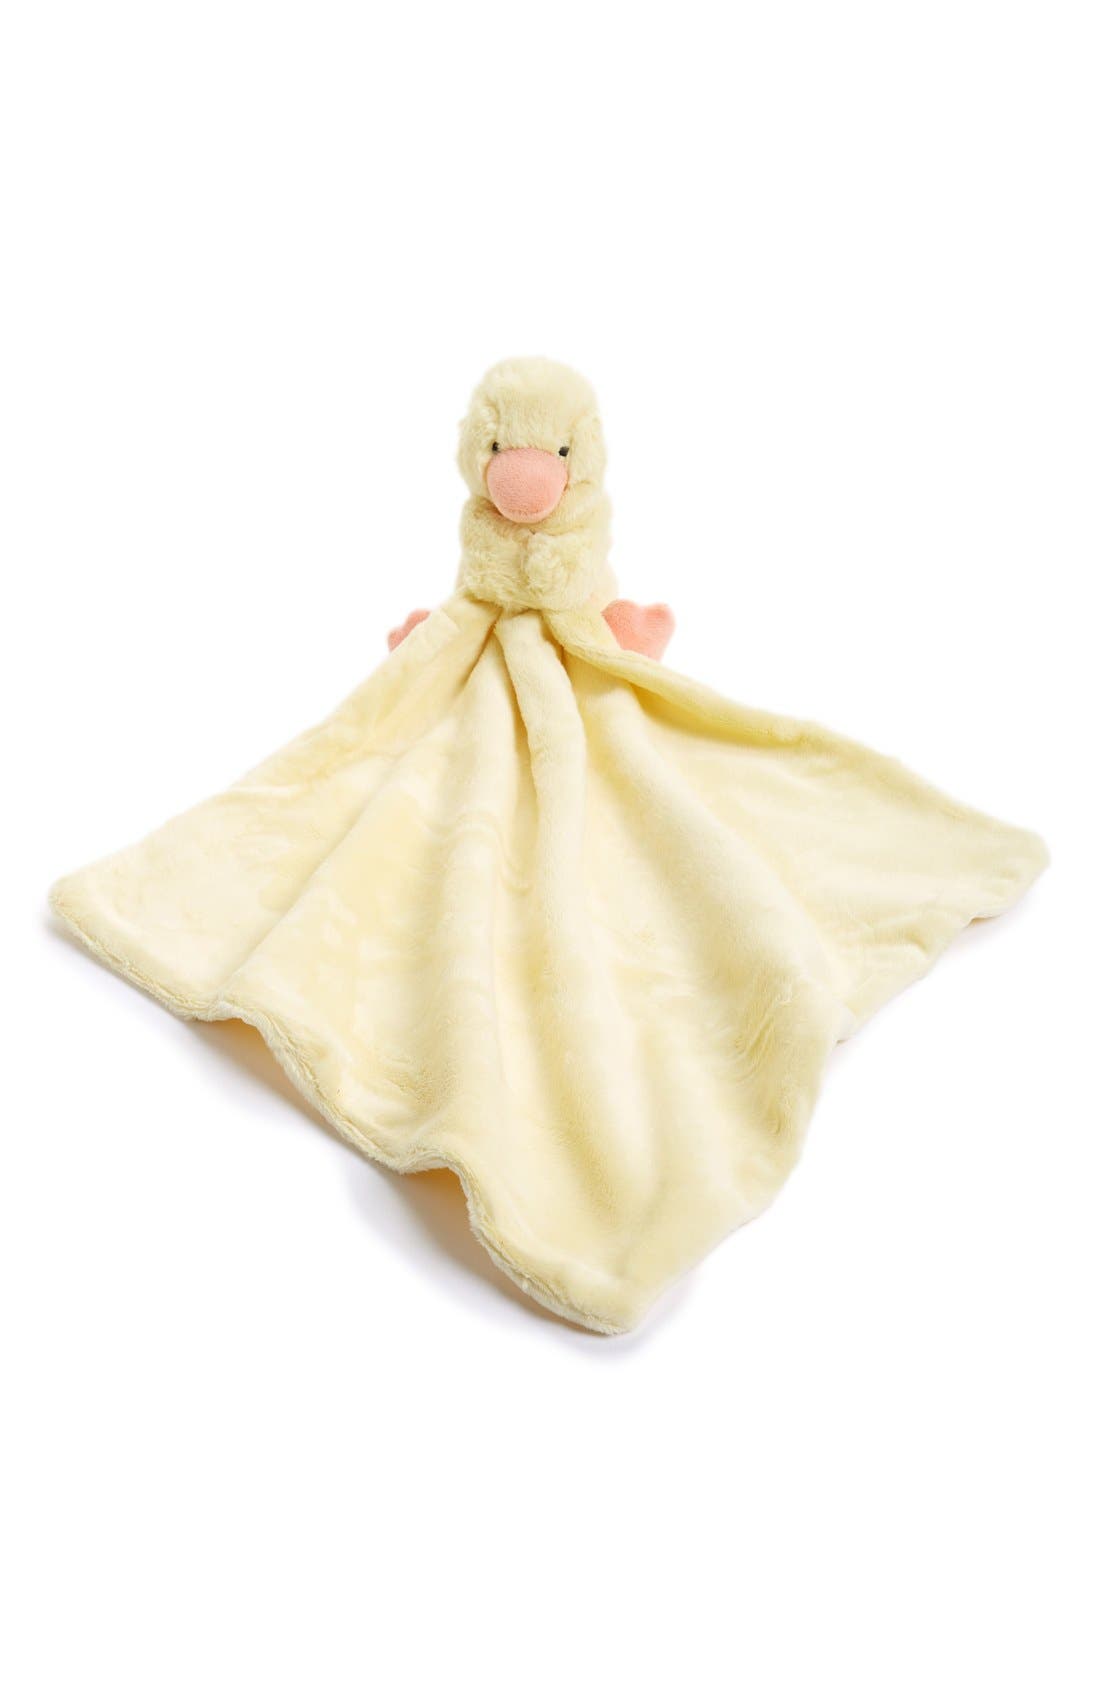 jellycat duckling soother